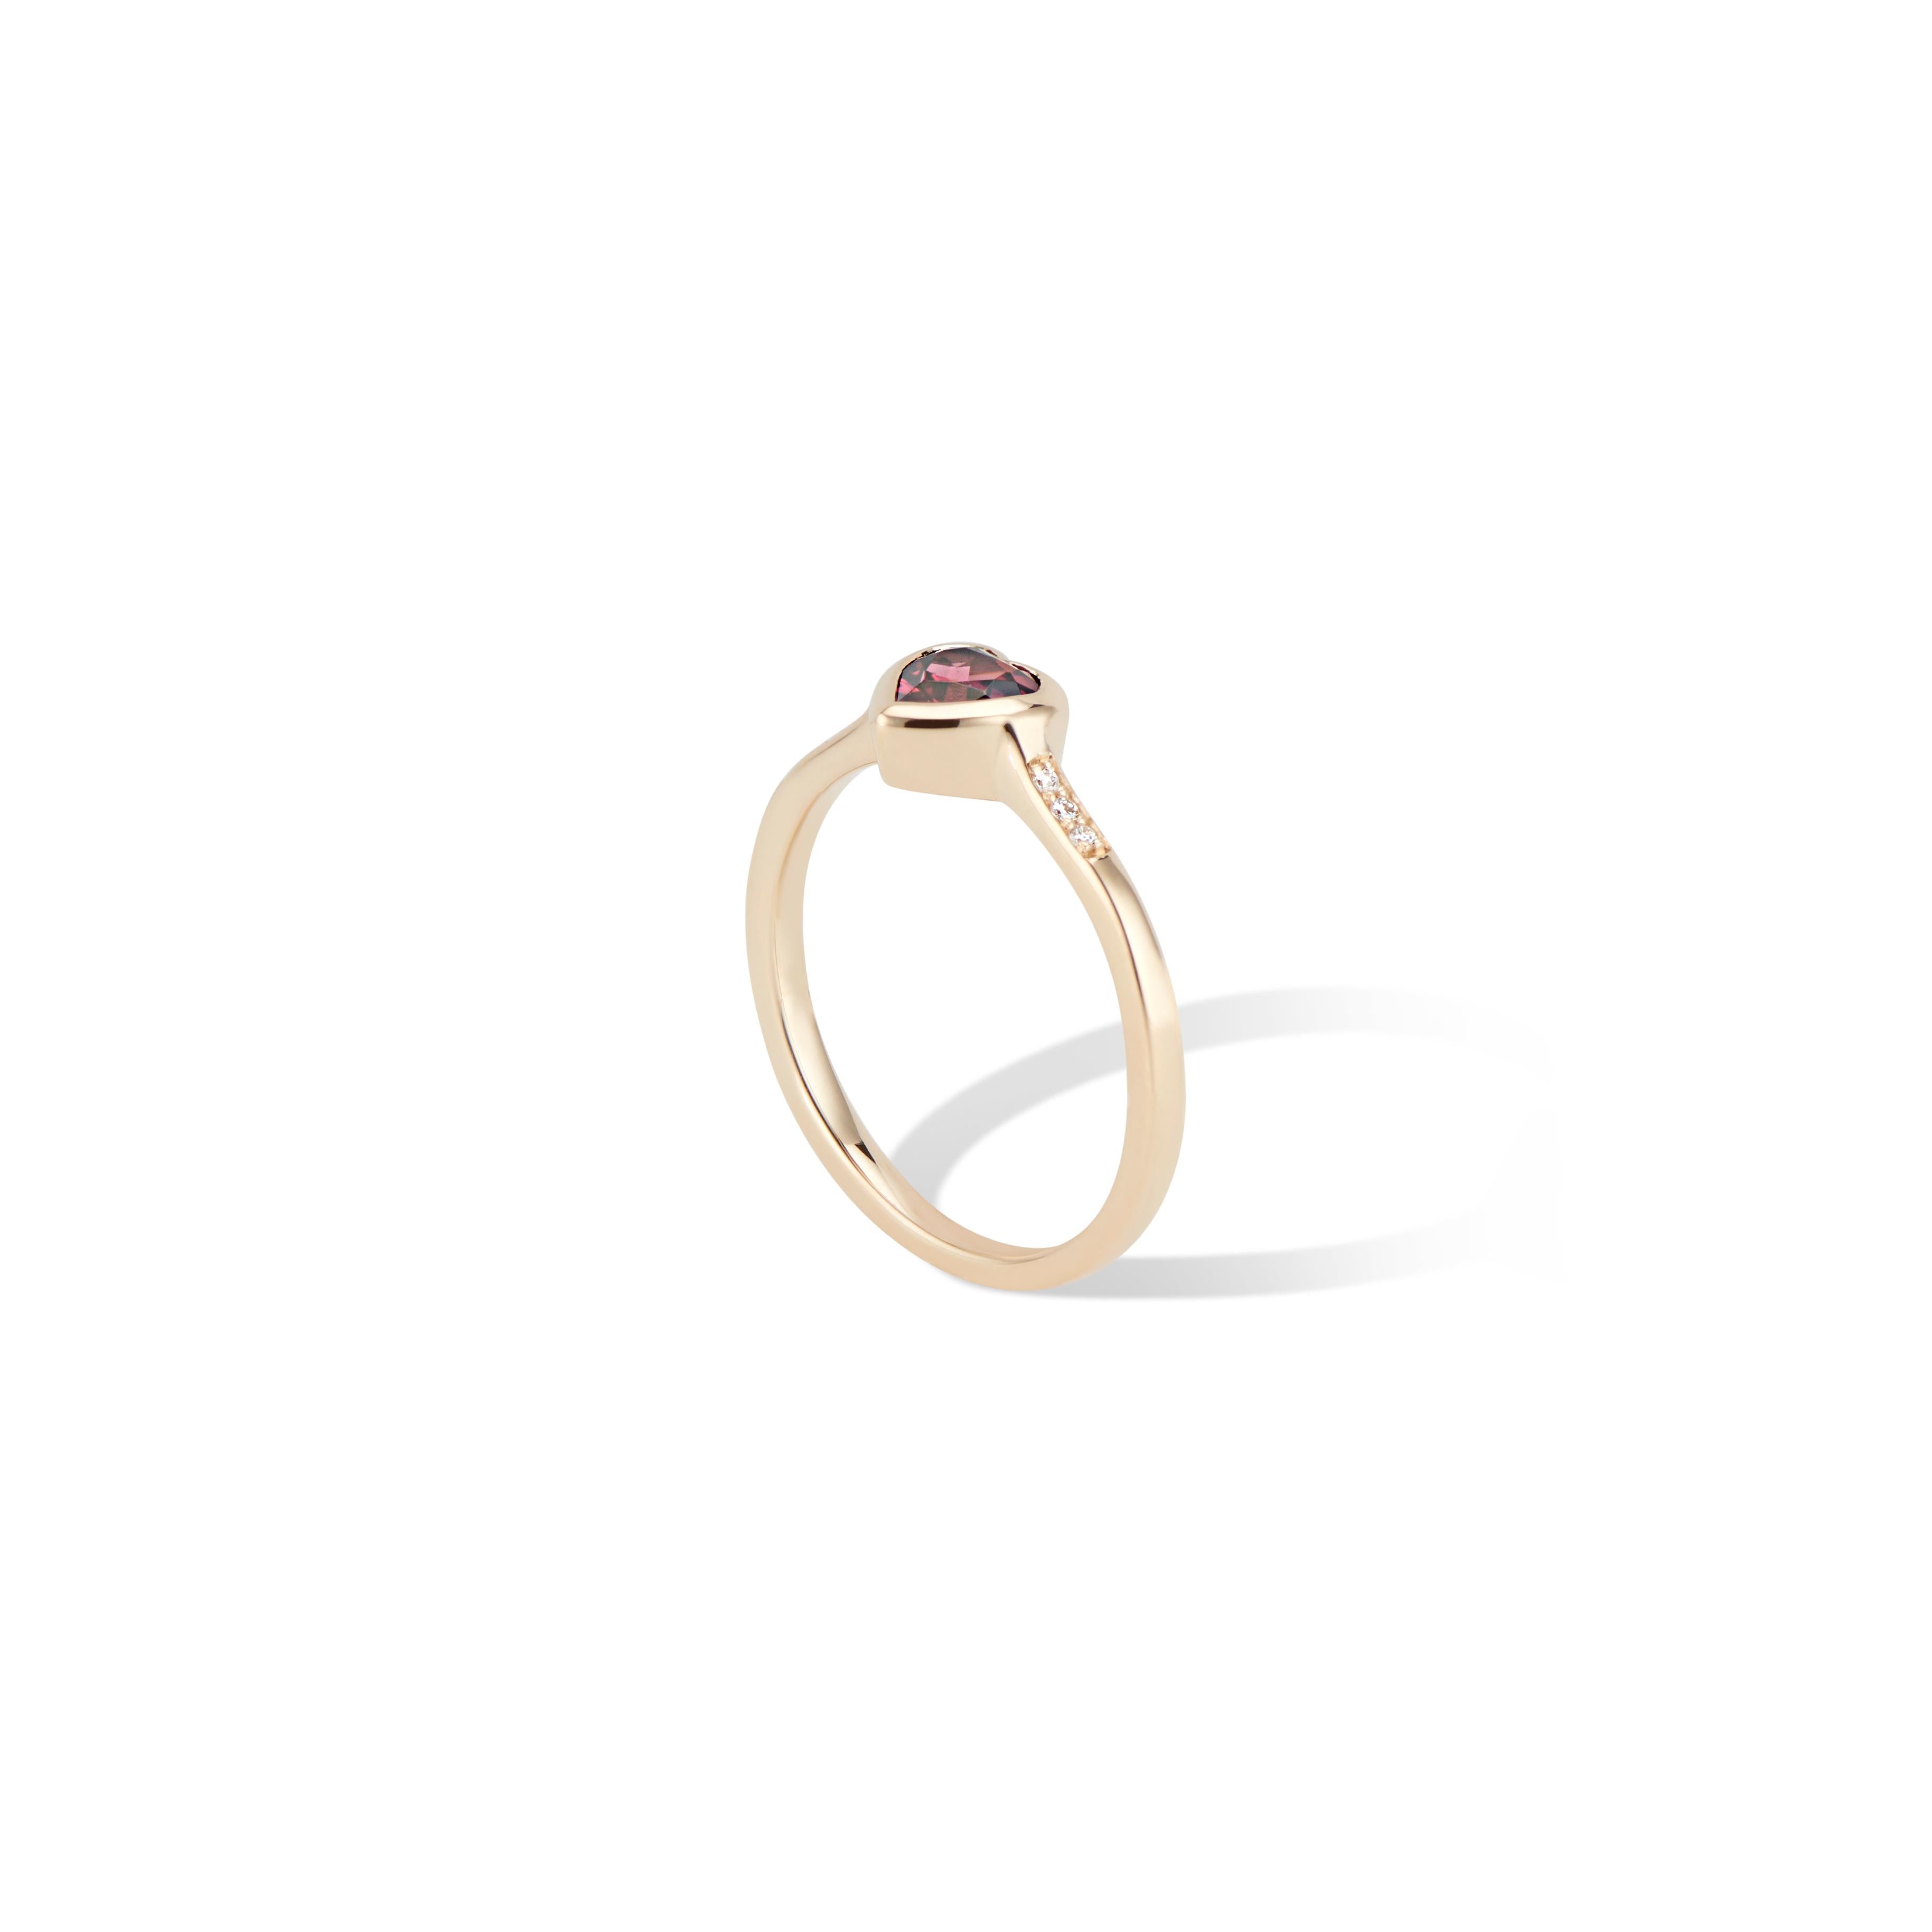 This 14K Yellow Gold Diamond and Rhodolite Heart Ring is a petite stacking ring. 
Layer with more hearts, bezel set gems or stacking bands.

Featuring a striking ½ carat (.50tcw) Rhodolite Garnet Heart and in a polished bezel setting, with 
a little